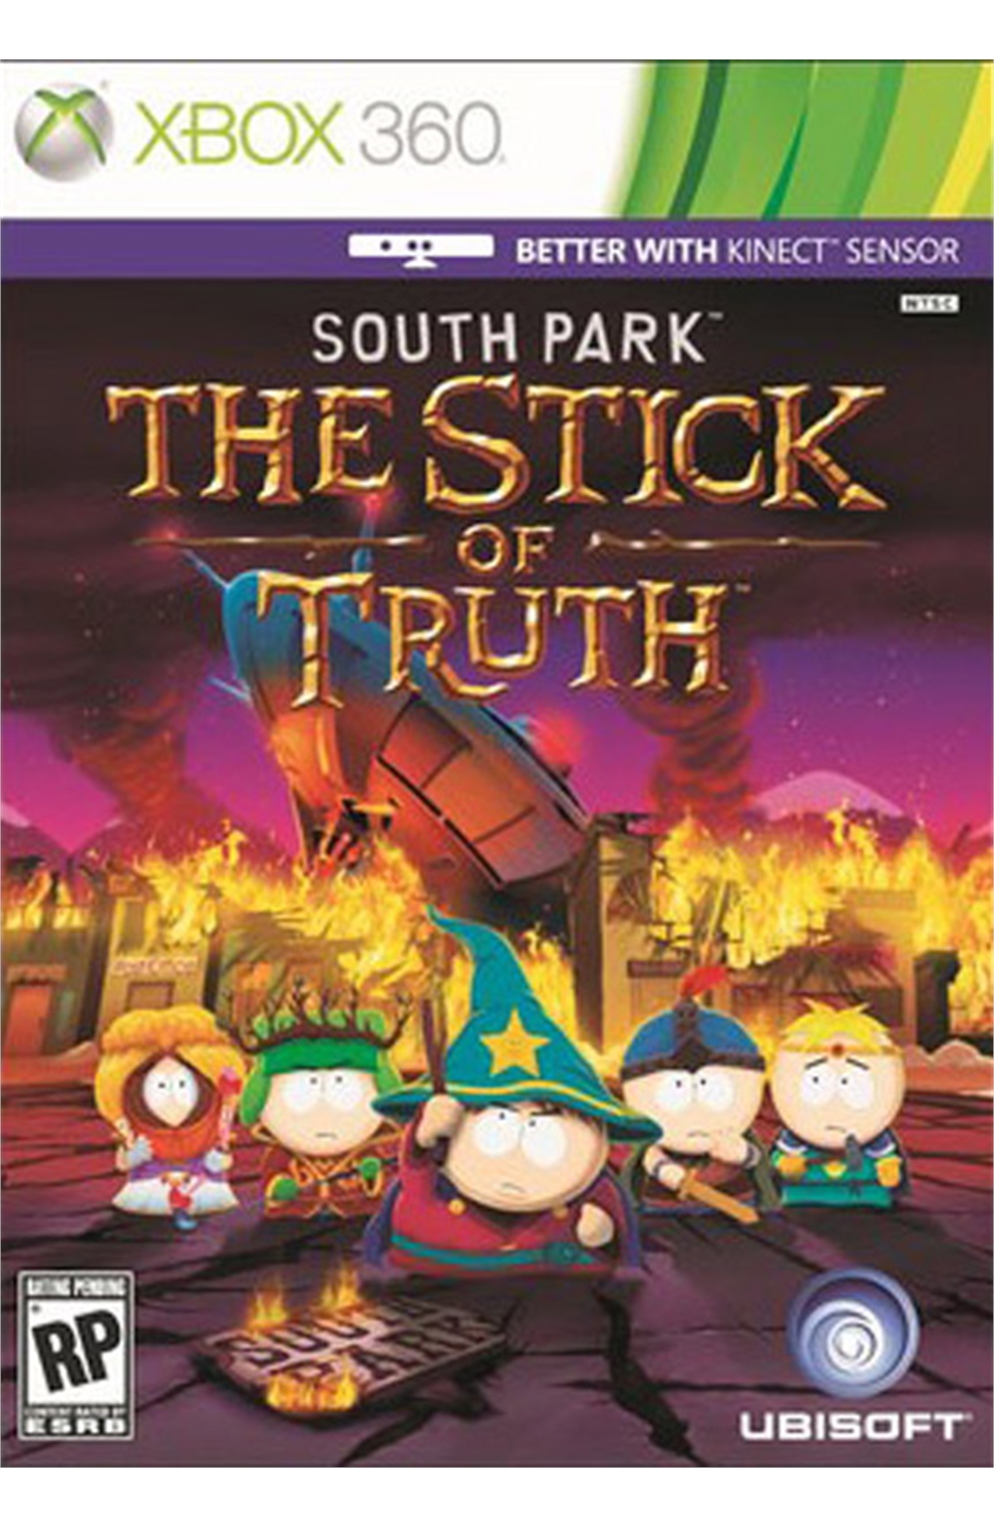 Xbox 360 Xb360 South Park: The Stick of Truth